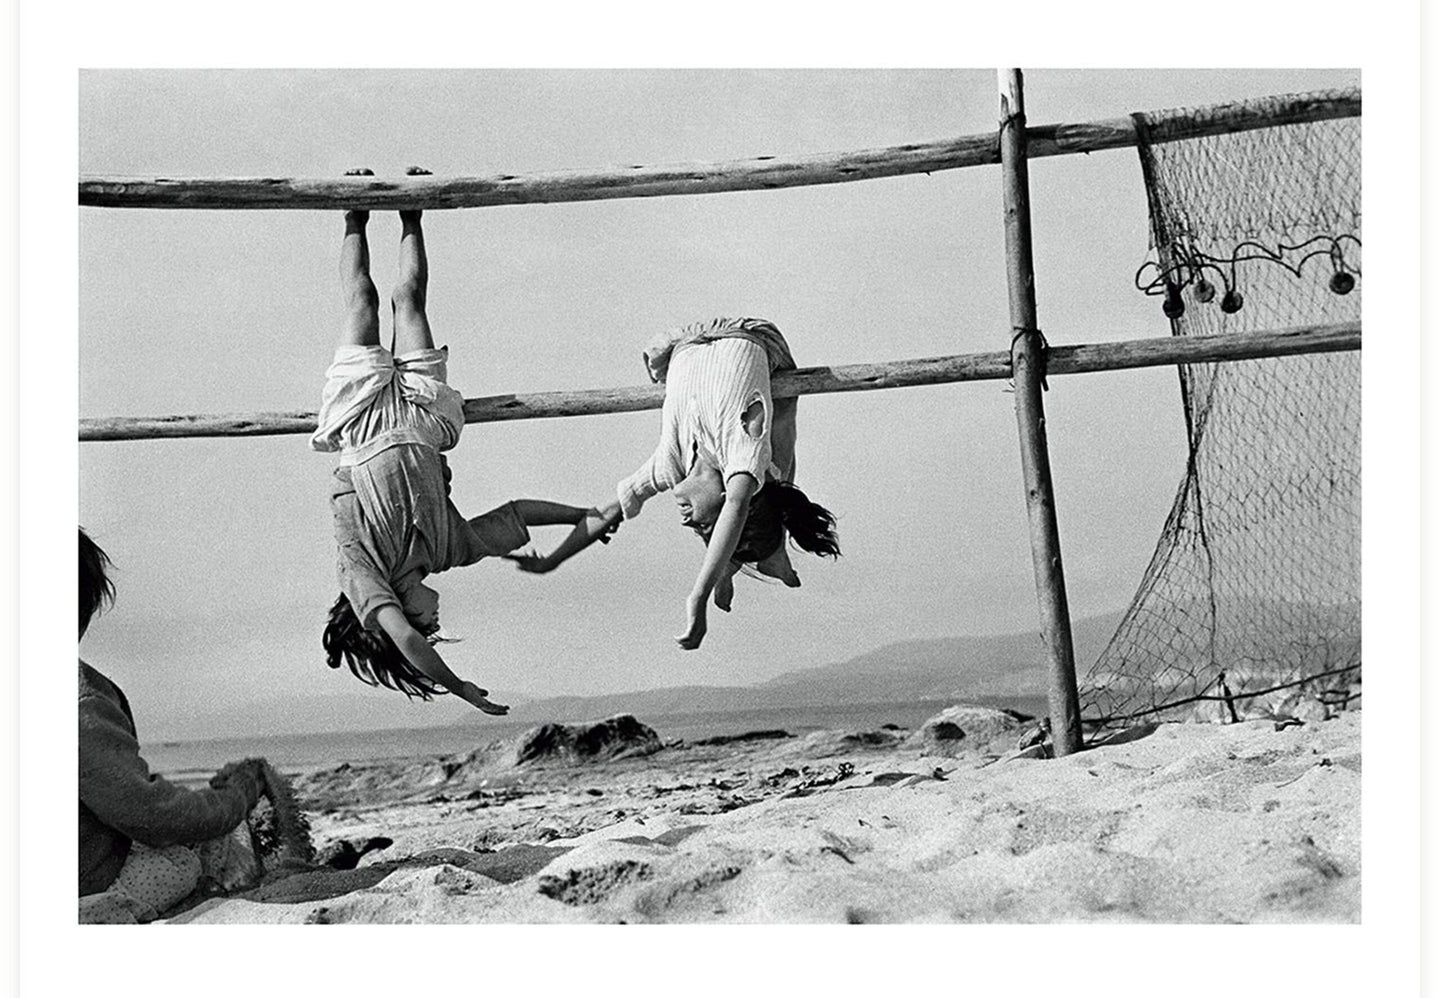 Two young women play on a fence on the beach.